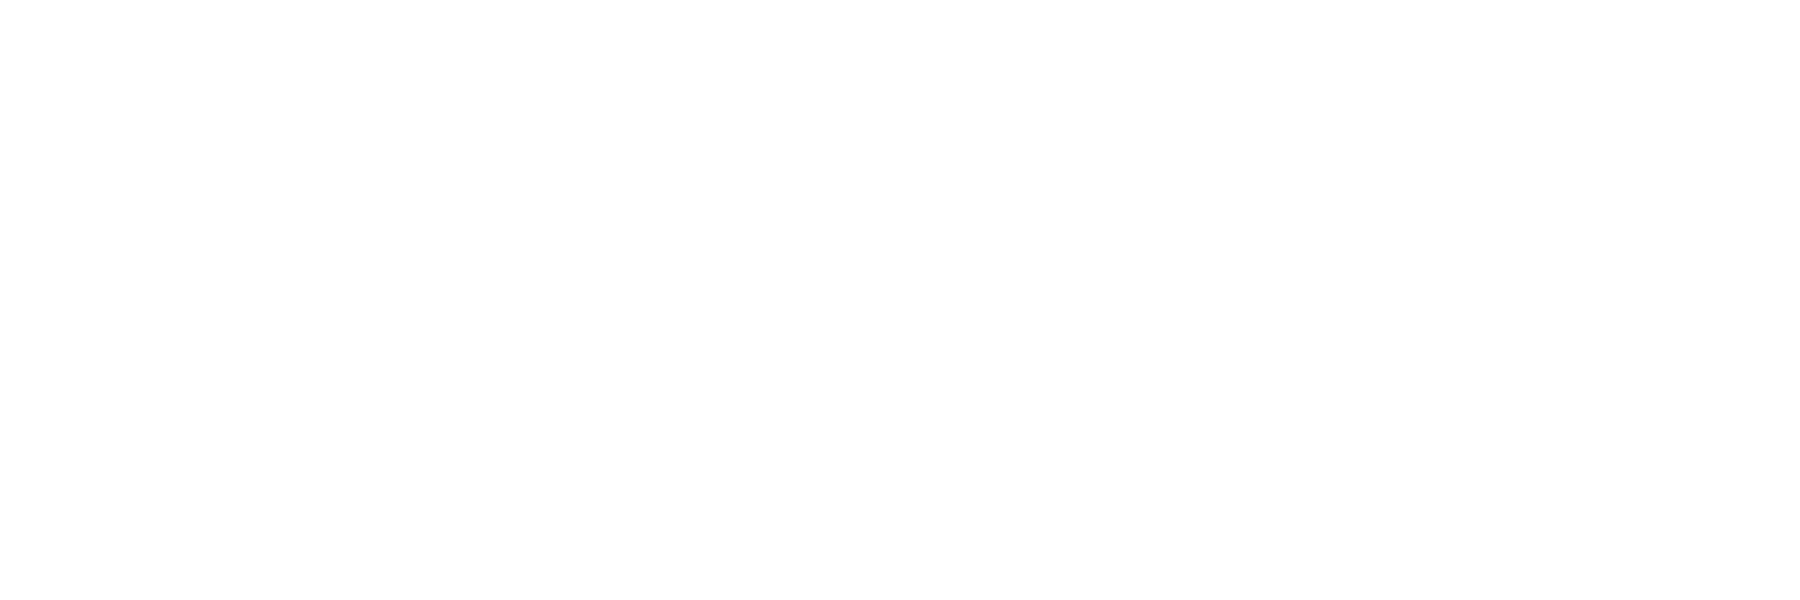 Cultivating Leaders Center of Excellence logo